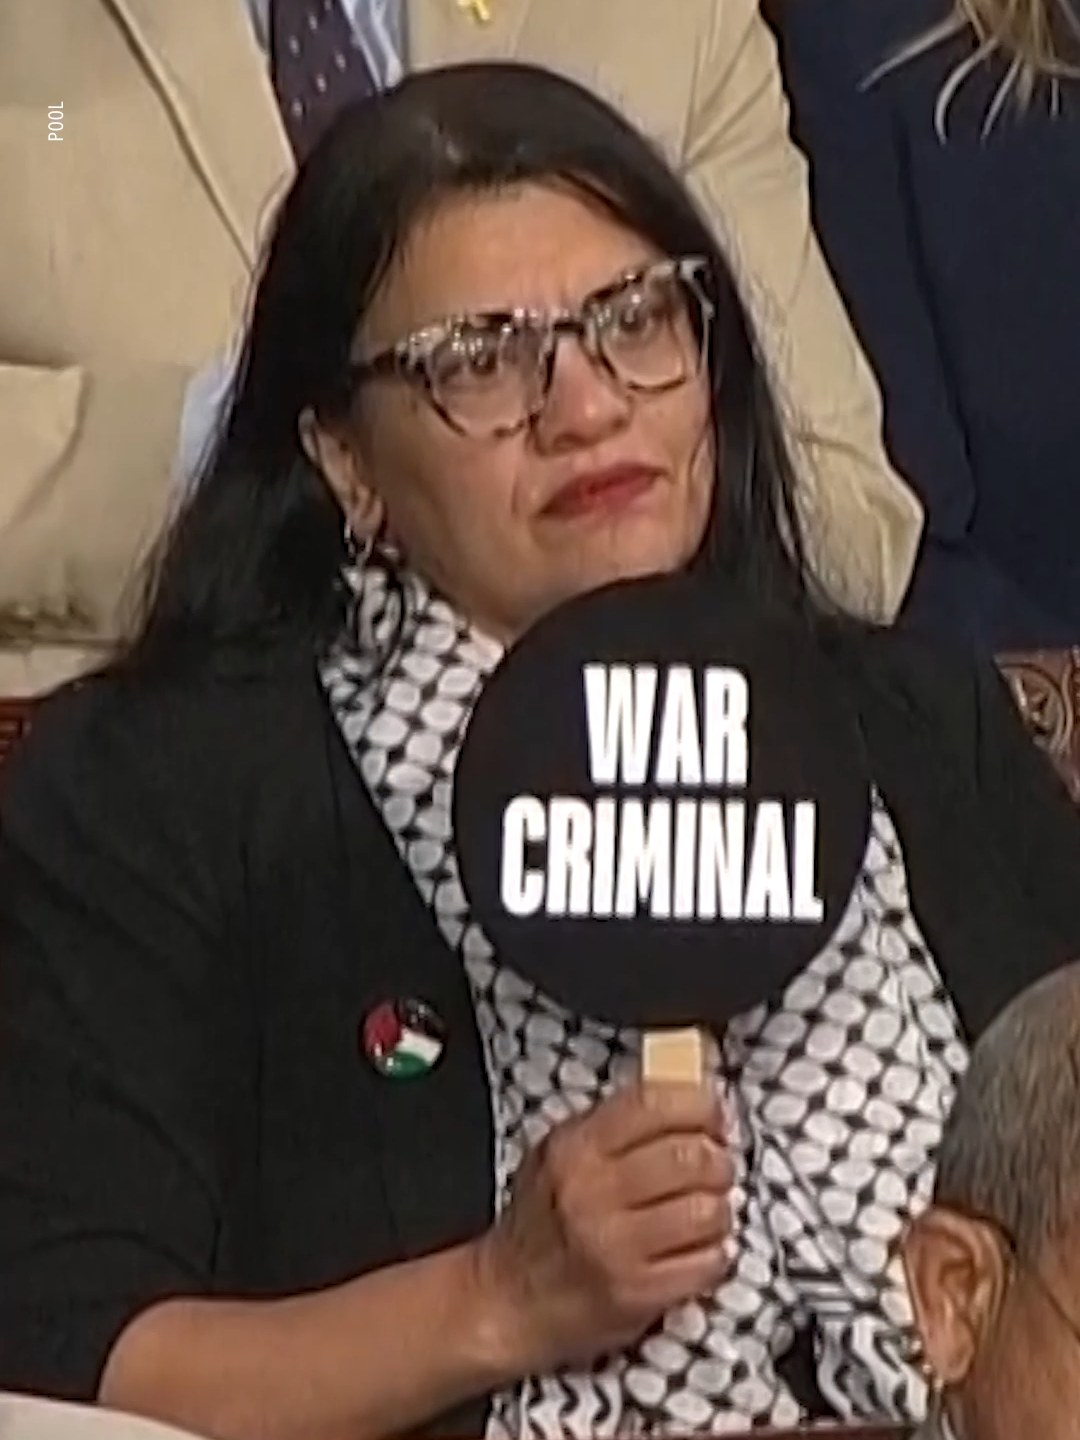 Israeli Prime Minister #BenjaminNetanyahu spoke to a joint session of Congress on Wednesday. Congresswoman #RashidaTlaib—a Democrat from Michigan who has been vocally critical of #Netanyahu and was censured last year over her comments about the Israel-Hamas War—held up a sign that read 